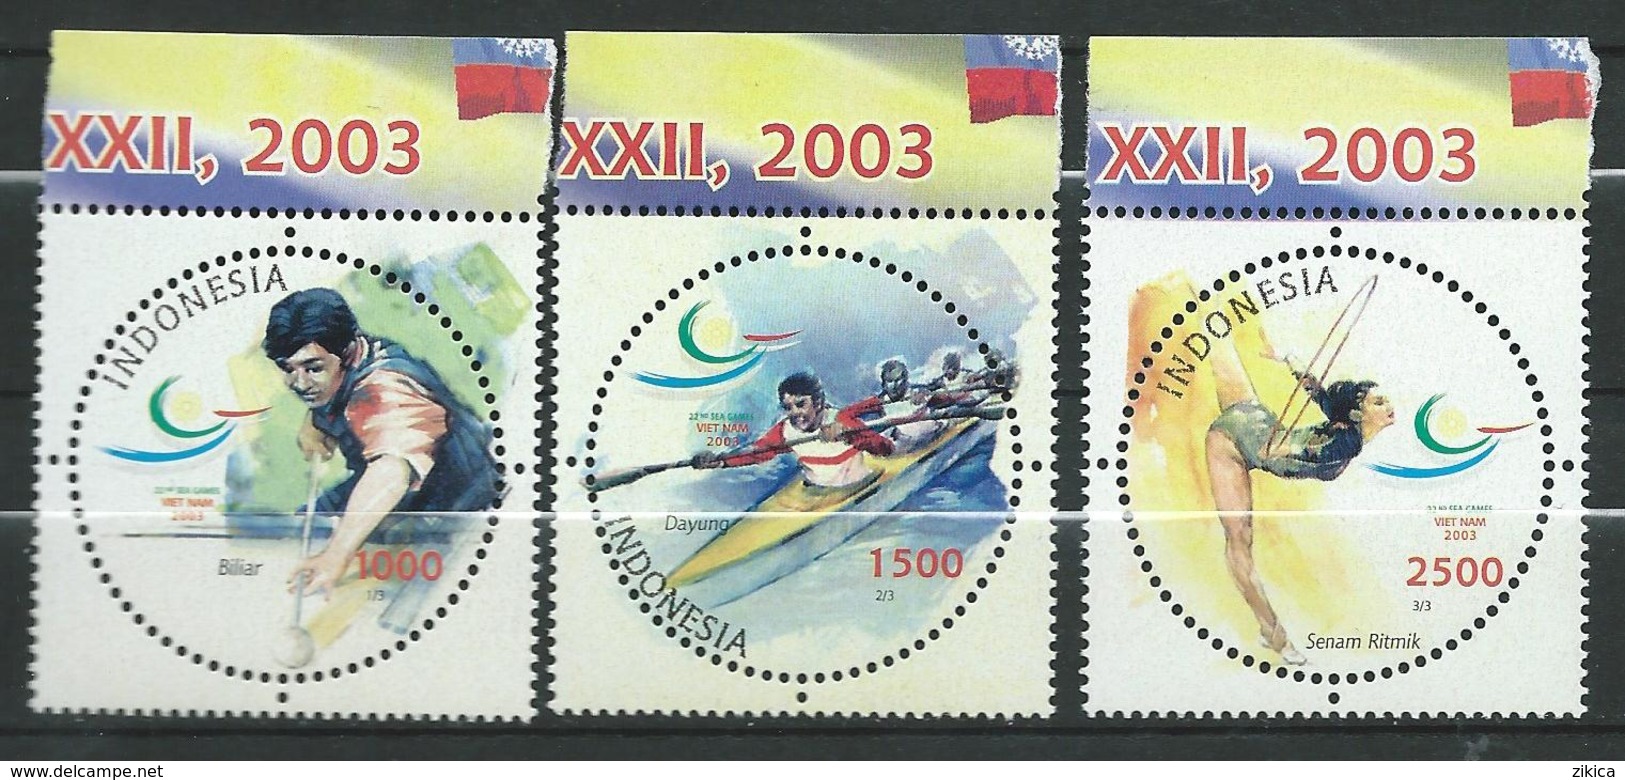 Indonesia 2003 The 22nd South East Asian Games, Vietnam.sport.MNH - Indonesien